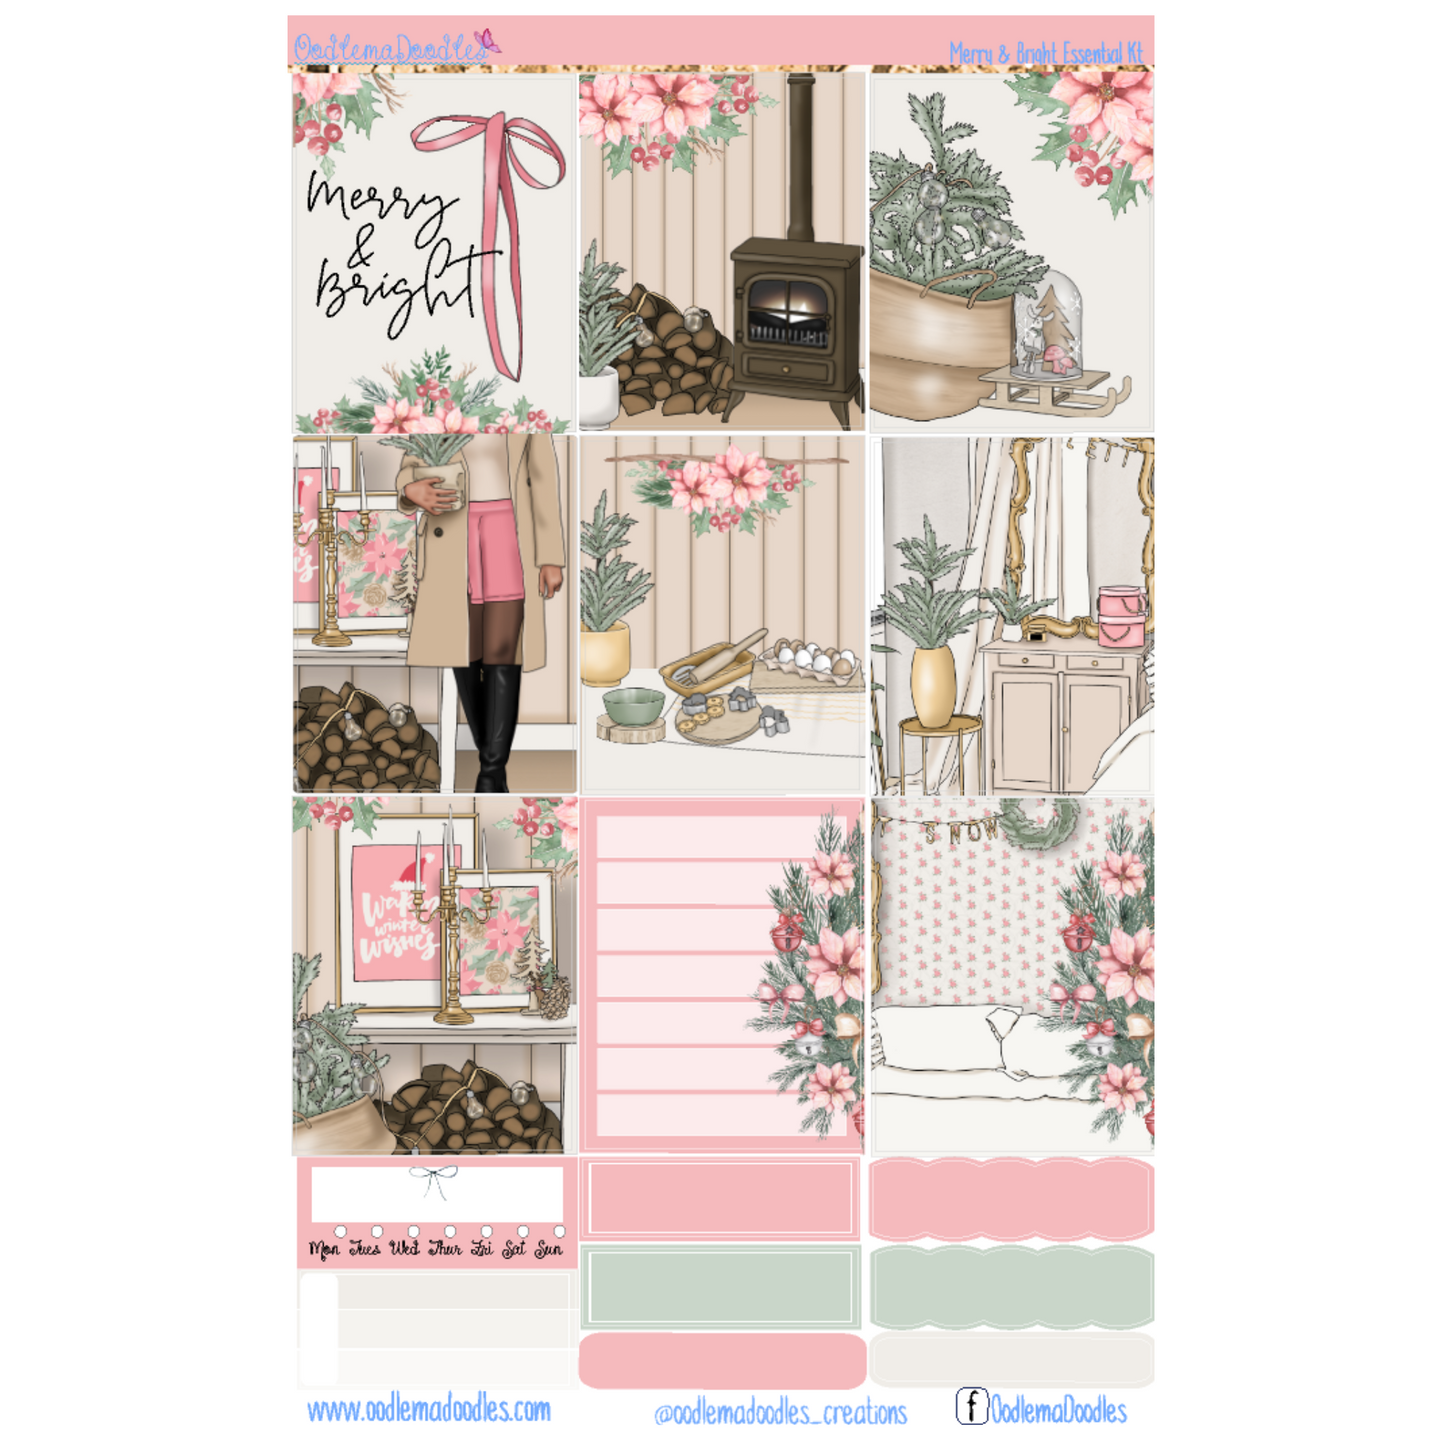 Merry and Bright Essential Planner Sticker Kit